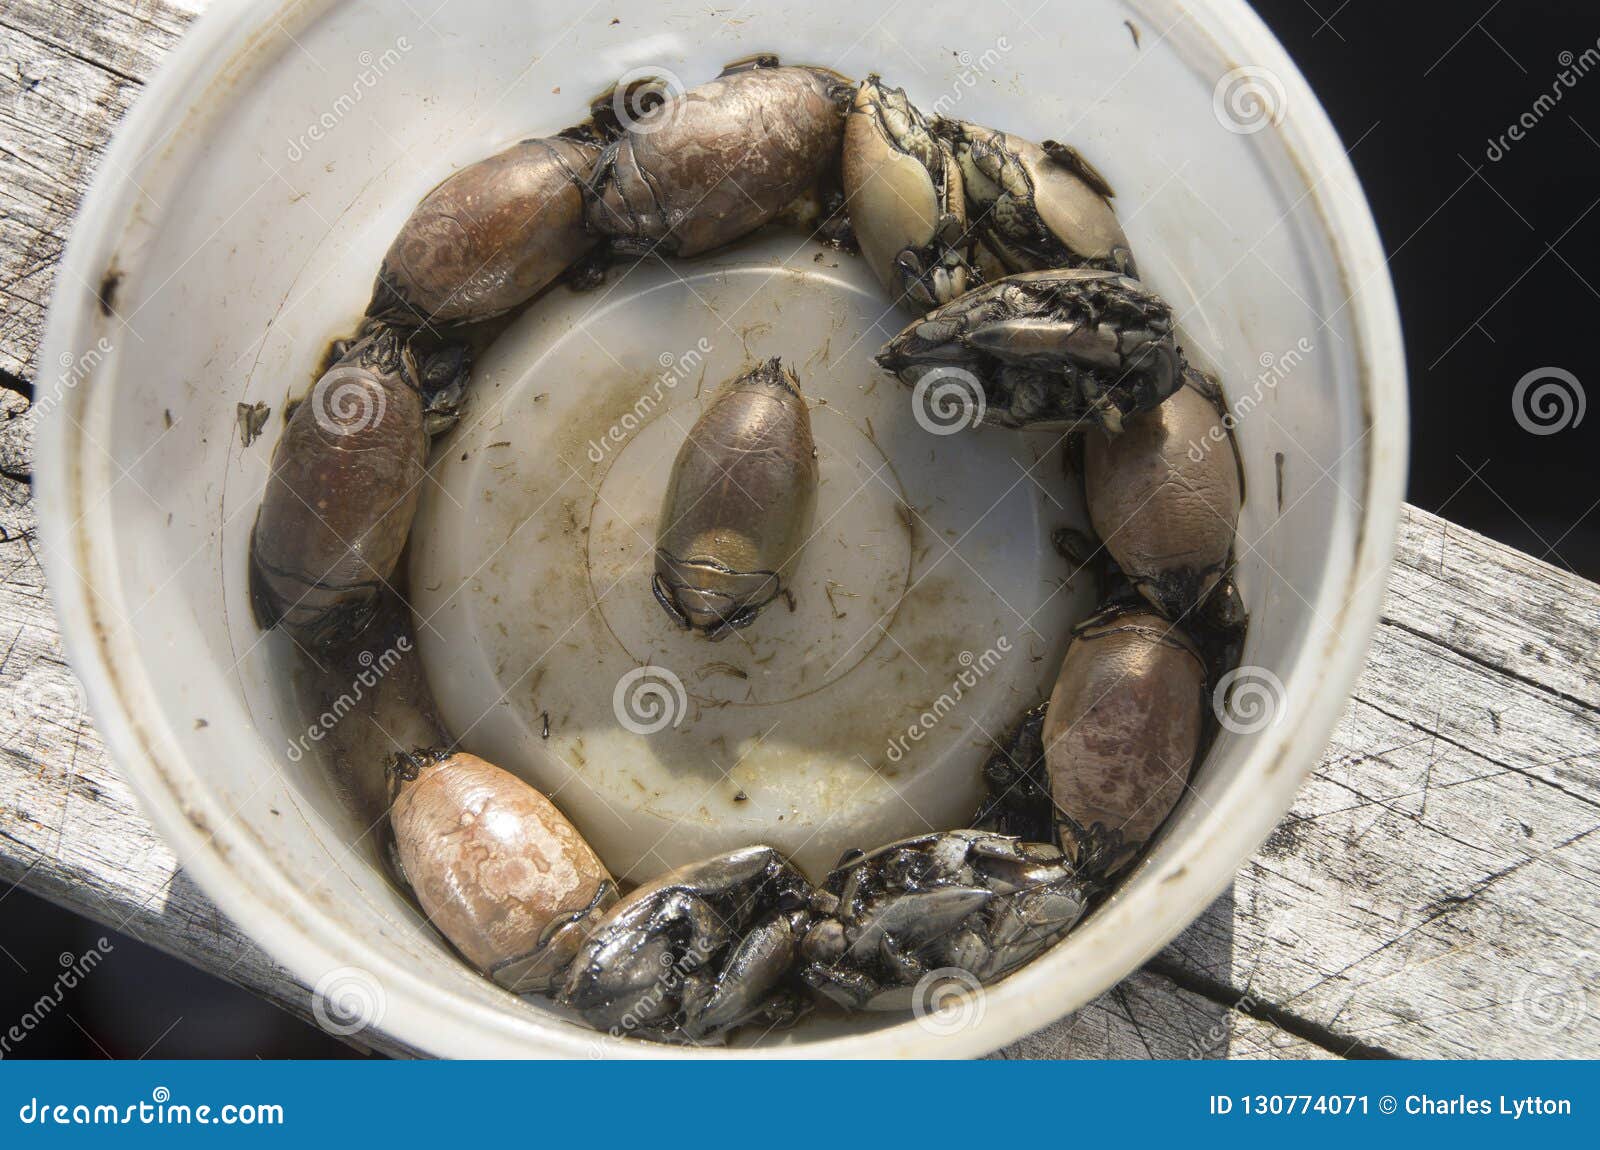 Sand Fleas Ready To Be Used for Bait Stock Image - Image of